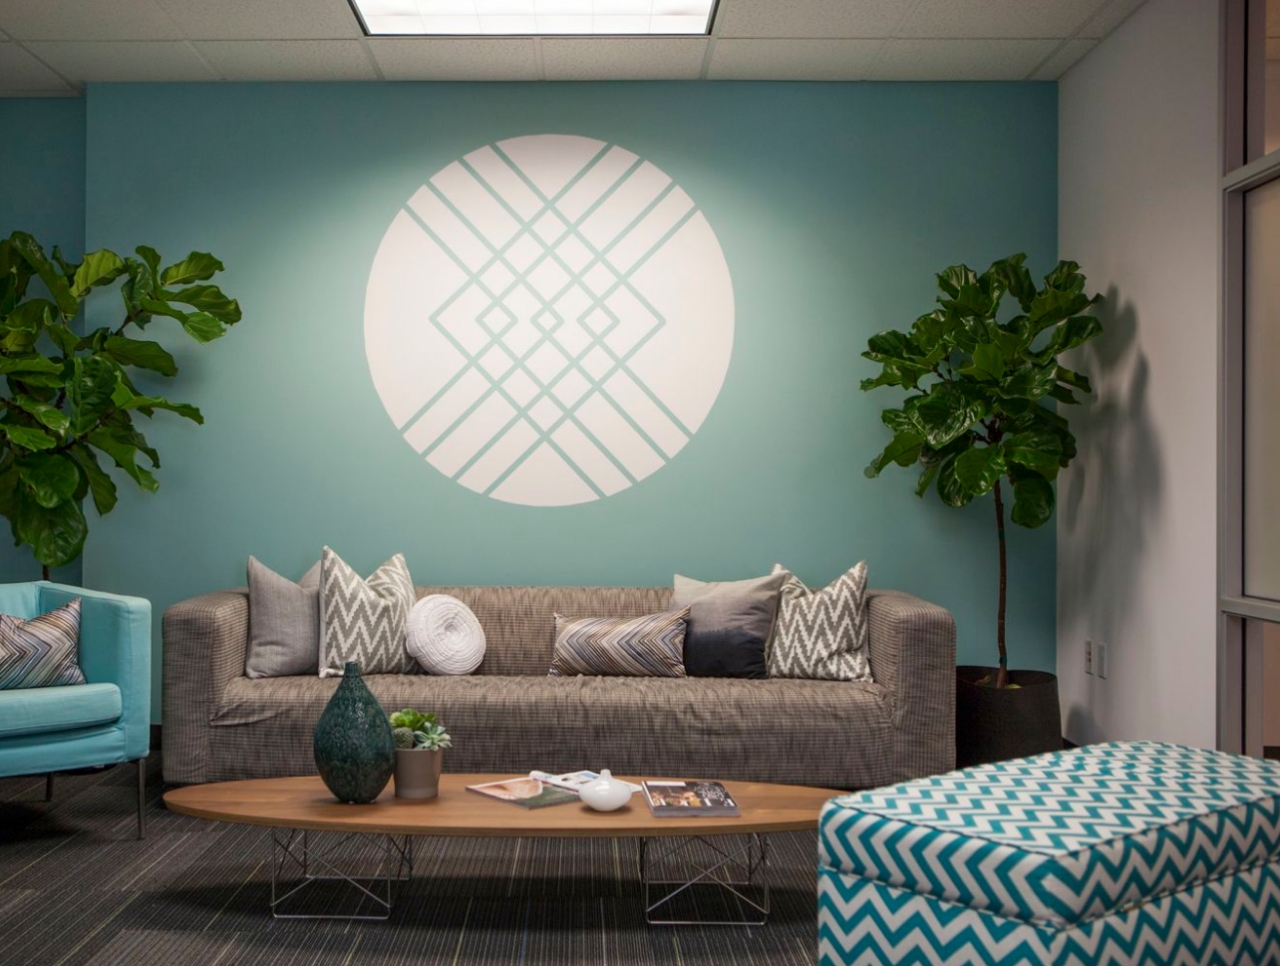 The lobby of Stitch Fix was designed to reflect the online styling service's casual and chic esthetic. The logo on the wall is a DIY project created with a projector and painters tape.